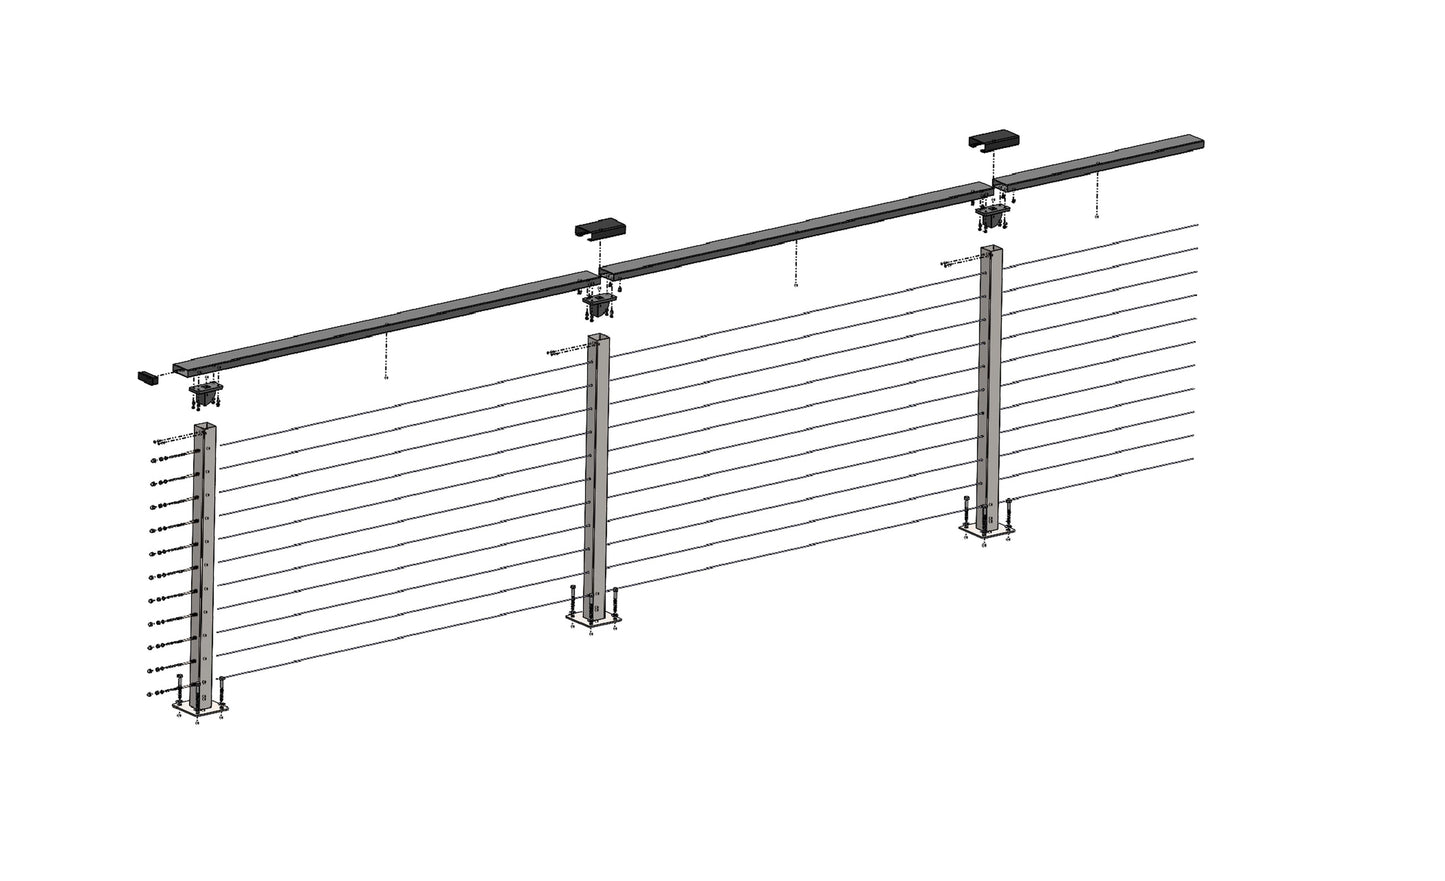 31 ft. x 42 in. Black Deck Cable Railing, Base Mount , Stainless